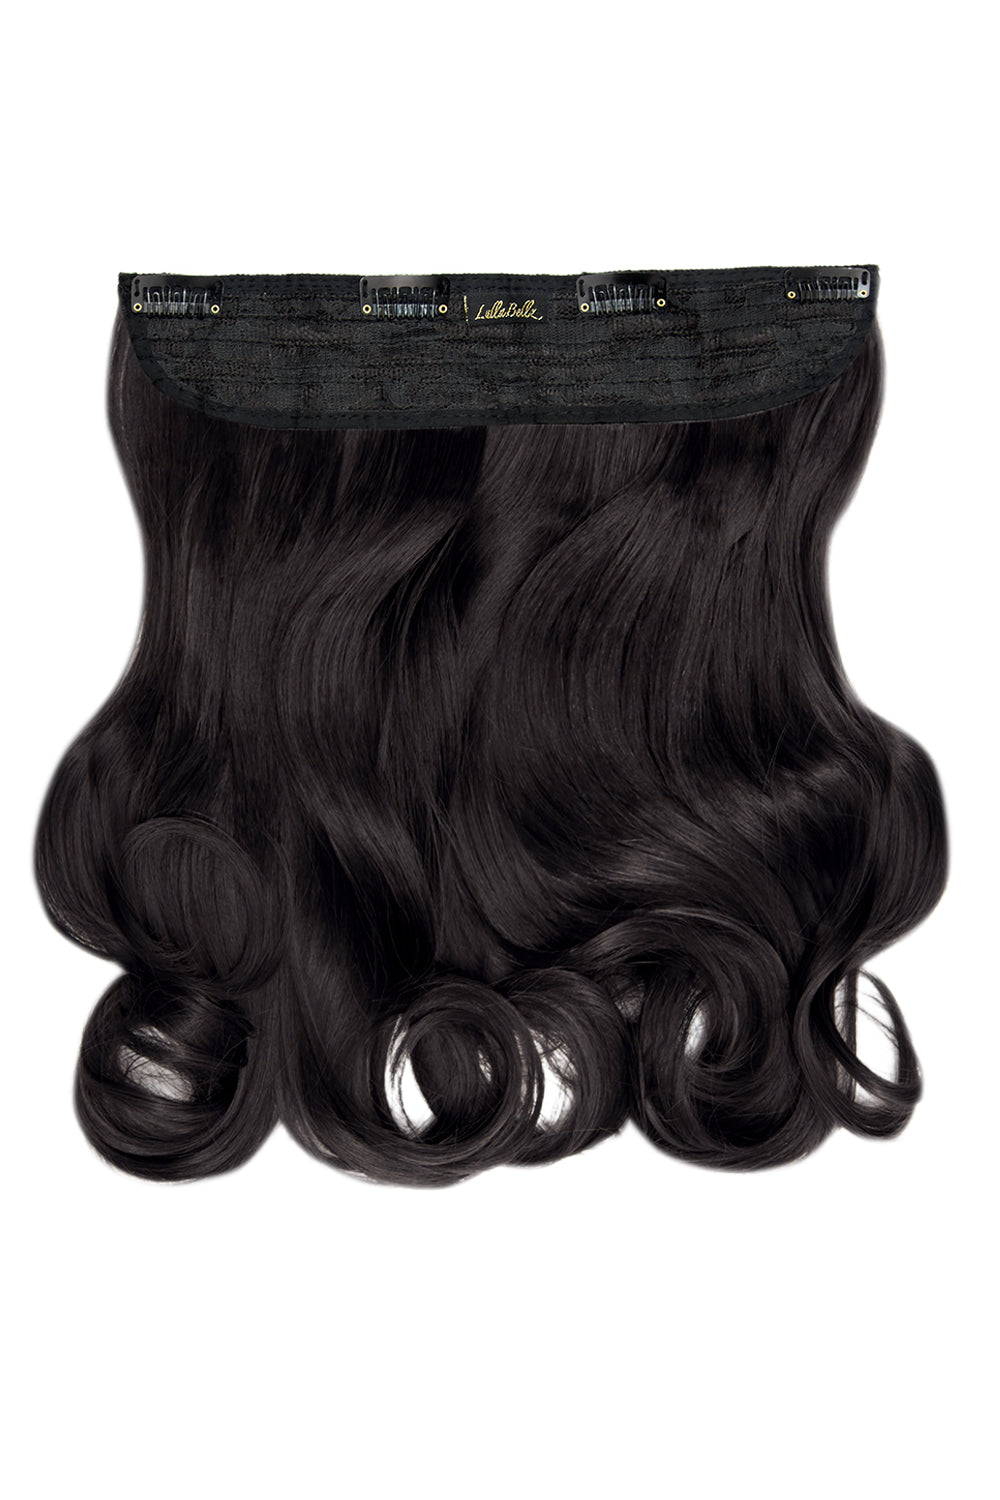 Thick 16" 1 Piece Curly Clip In Hair Extensions - LullaBellz - Raven